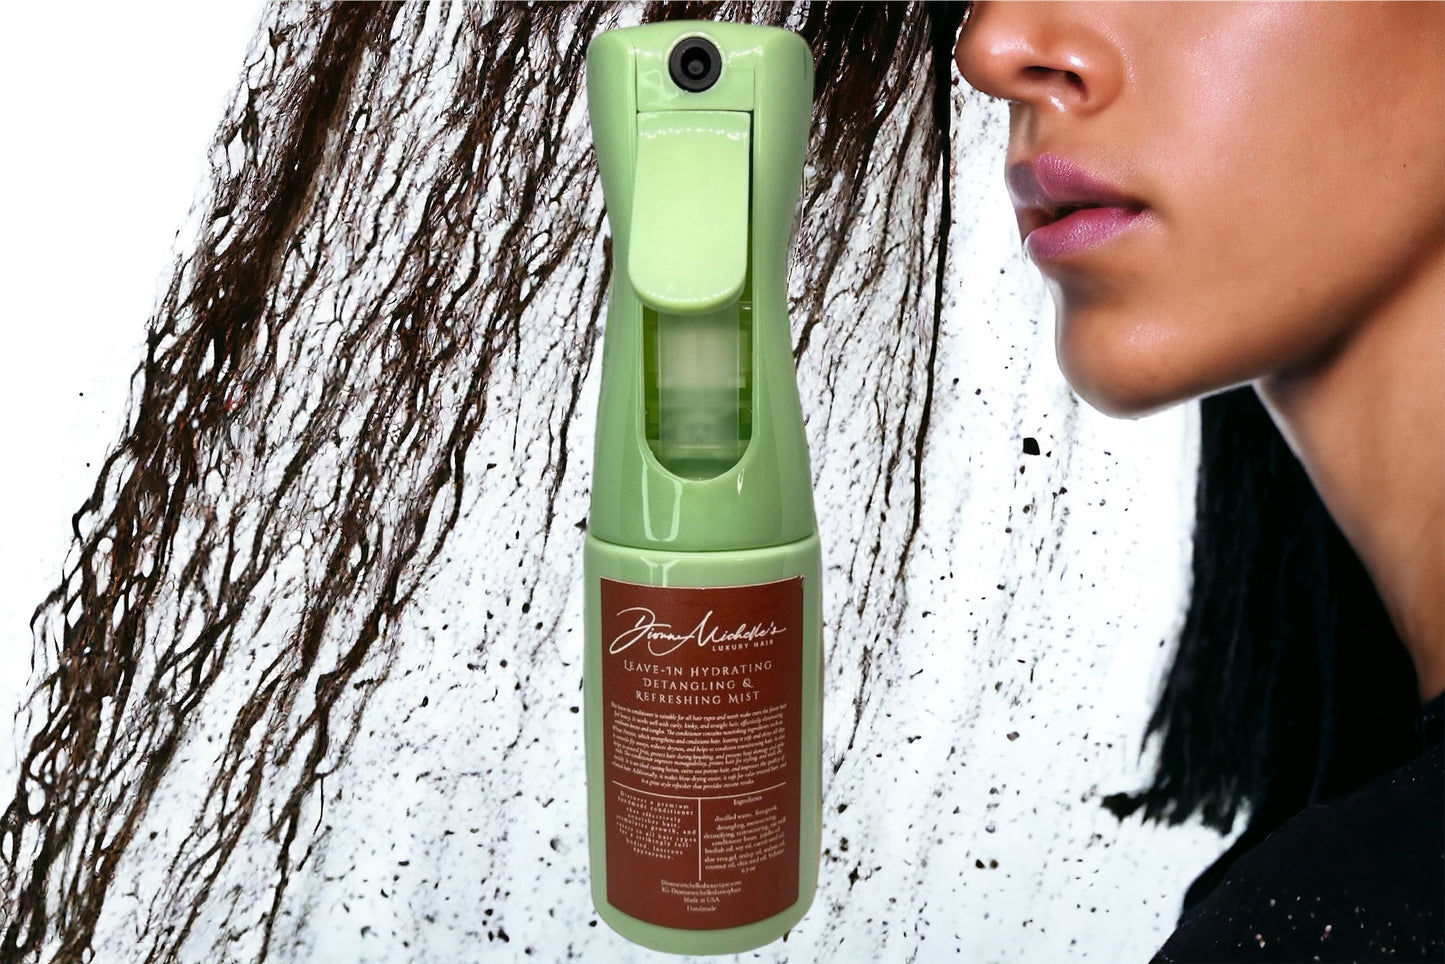 Dionne Michelle's Luxury Hair Leave-In Hydrating Detangling & Refreshing Mist